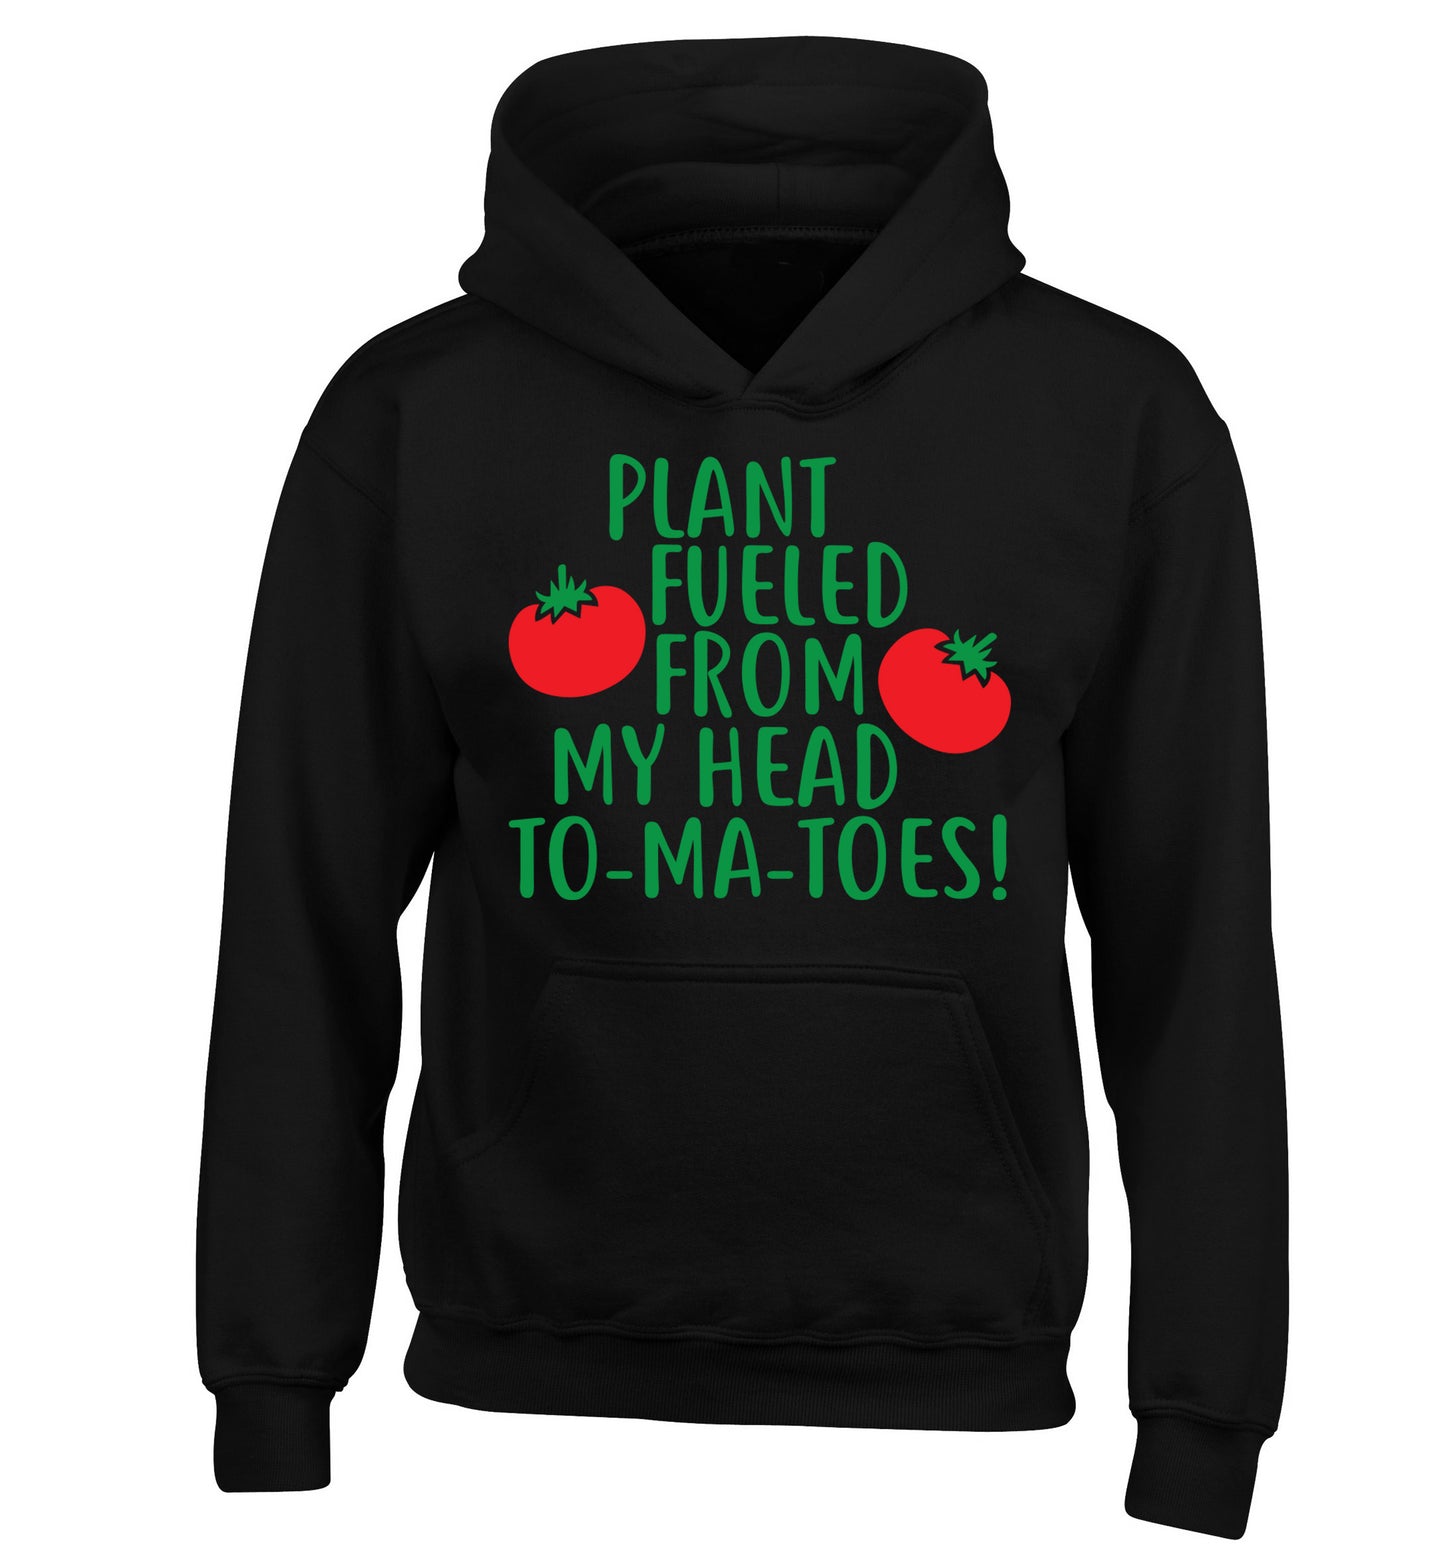 Plant fueled from my head to-ma-toes children's black hoodie 12-14 Years